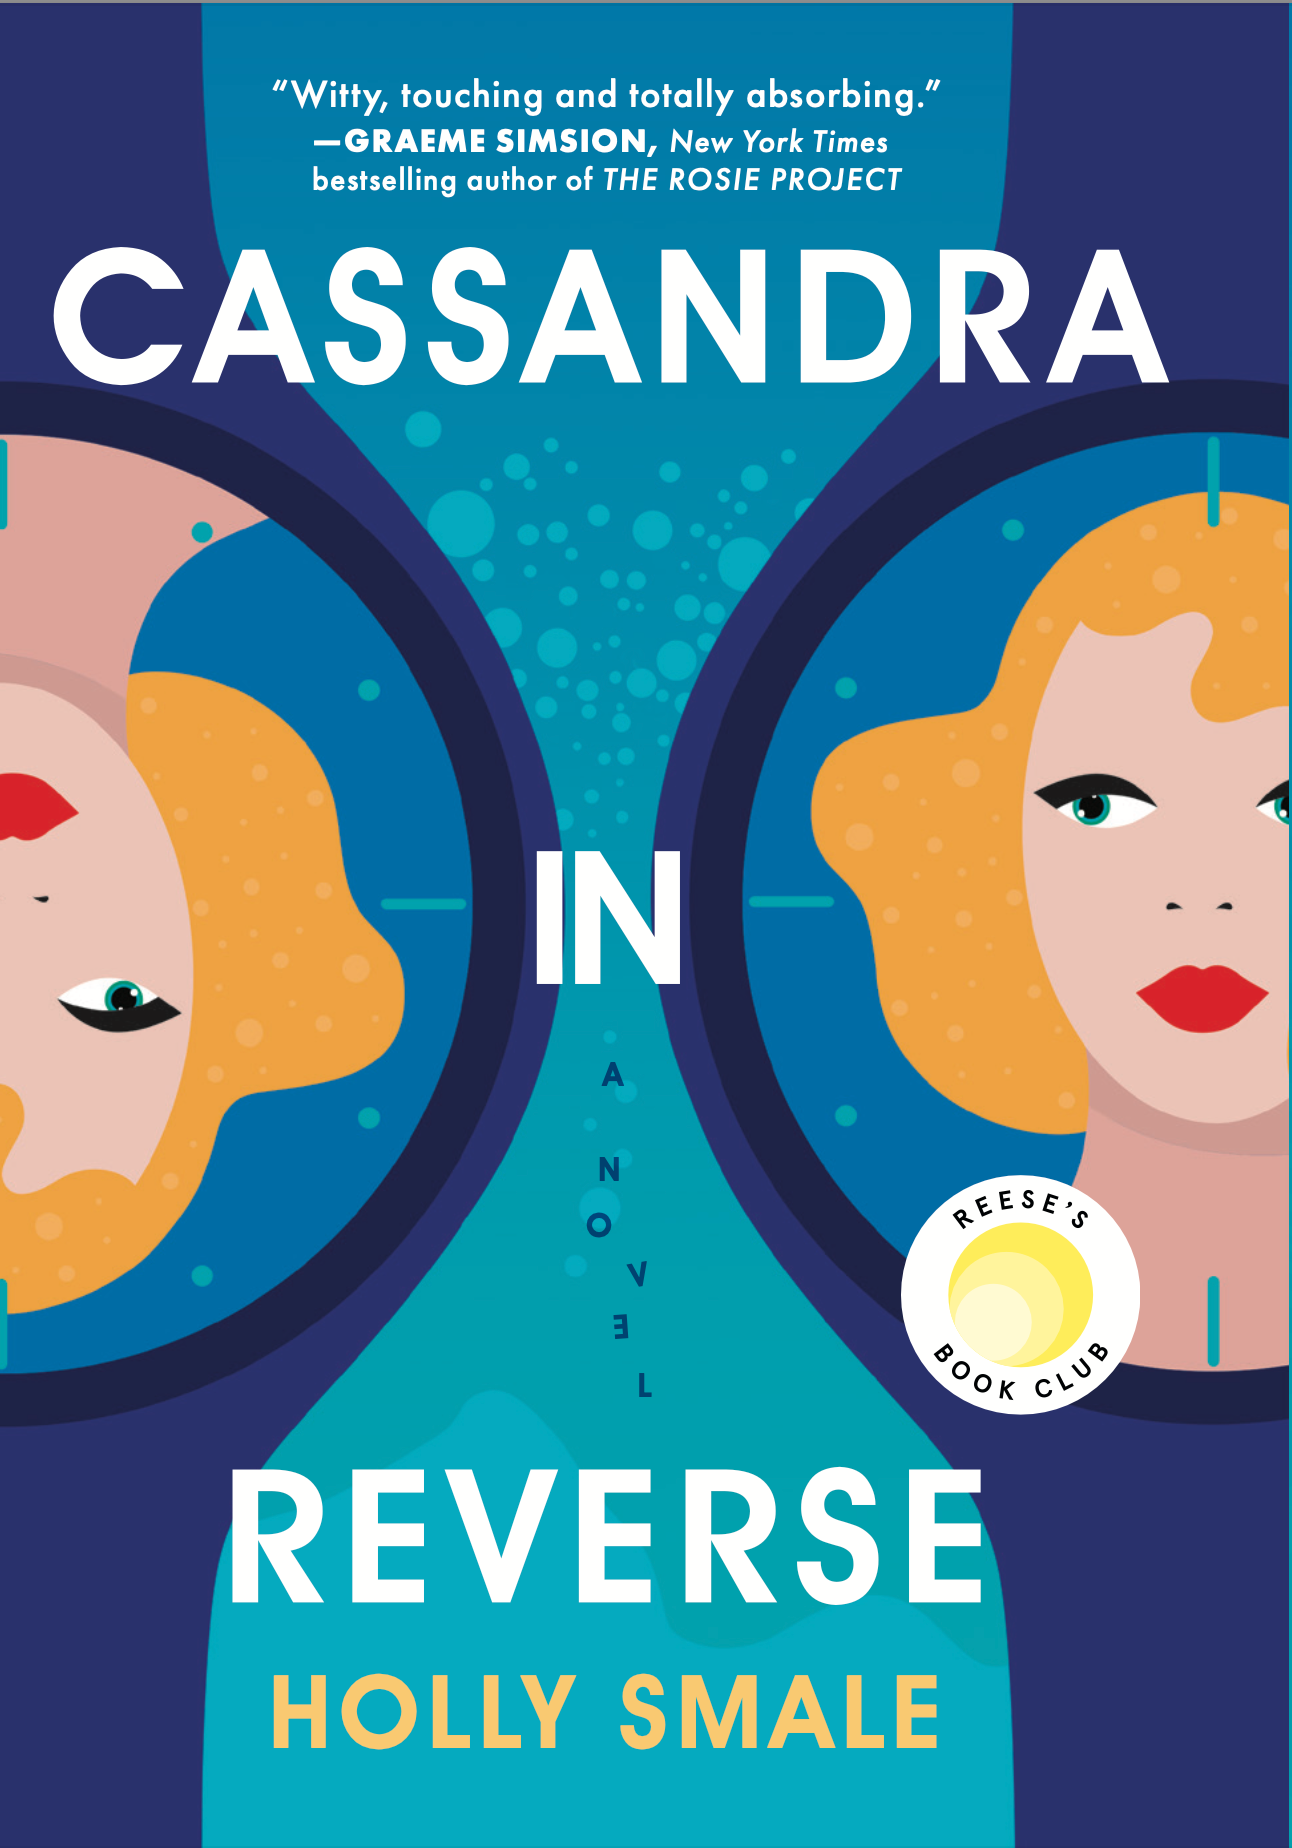 Cassandra in Reverse by Holly Smale